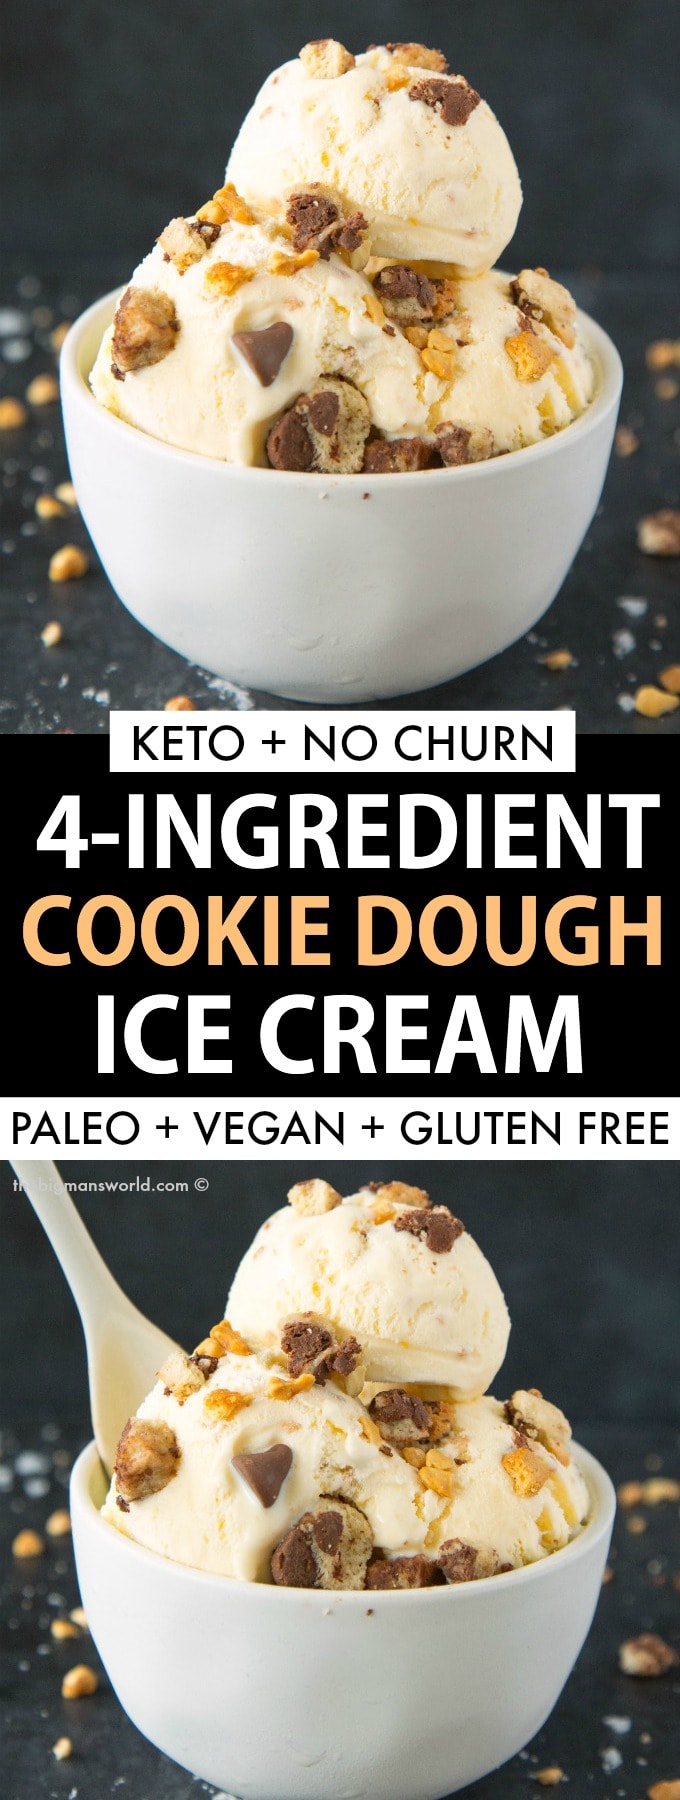 Healthy Vegan Keto No Churn Cookie Dough ice cream recipe made with just 4 ingredients